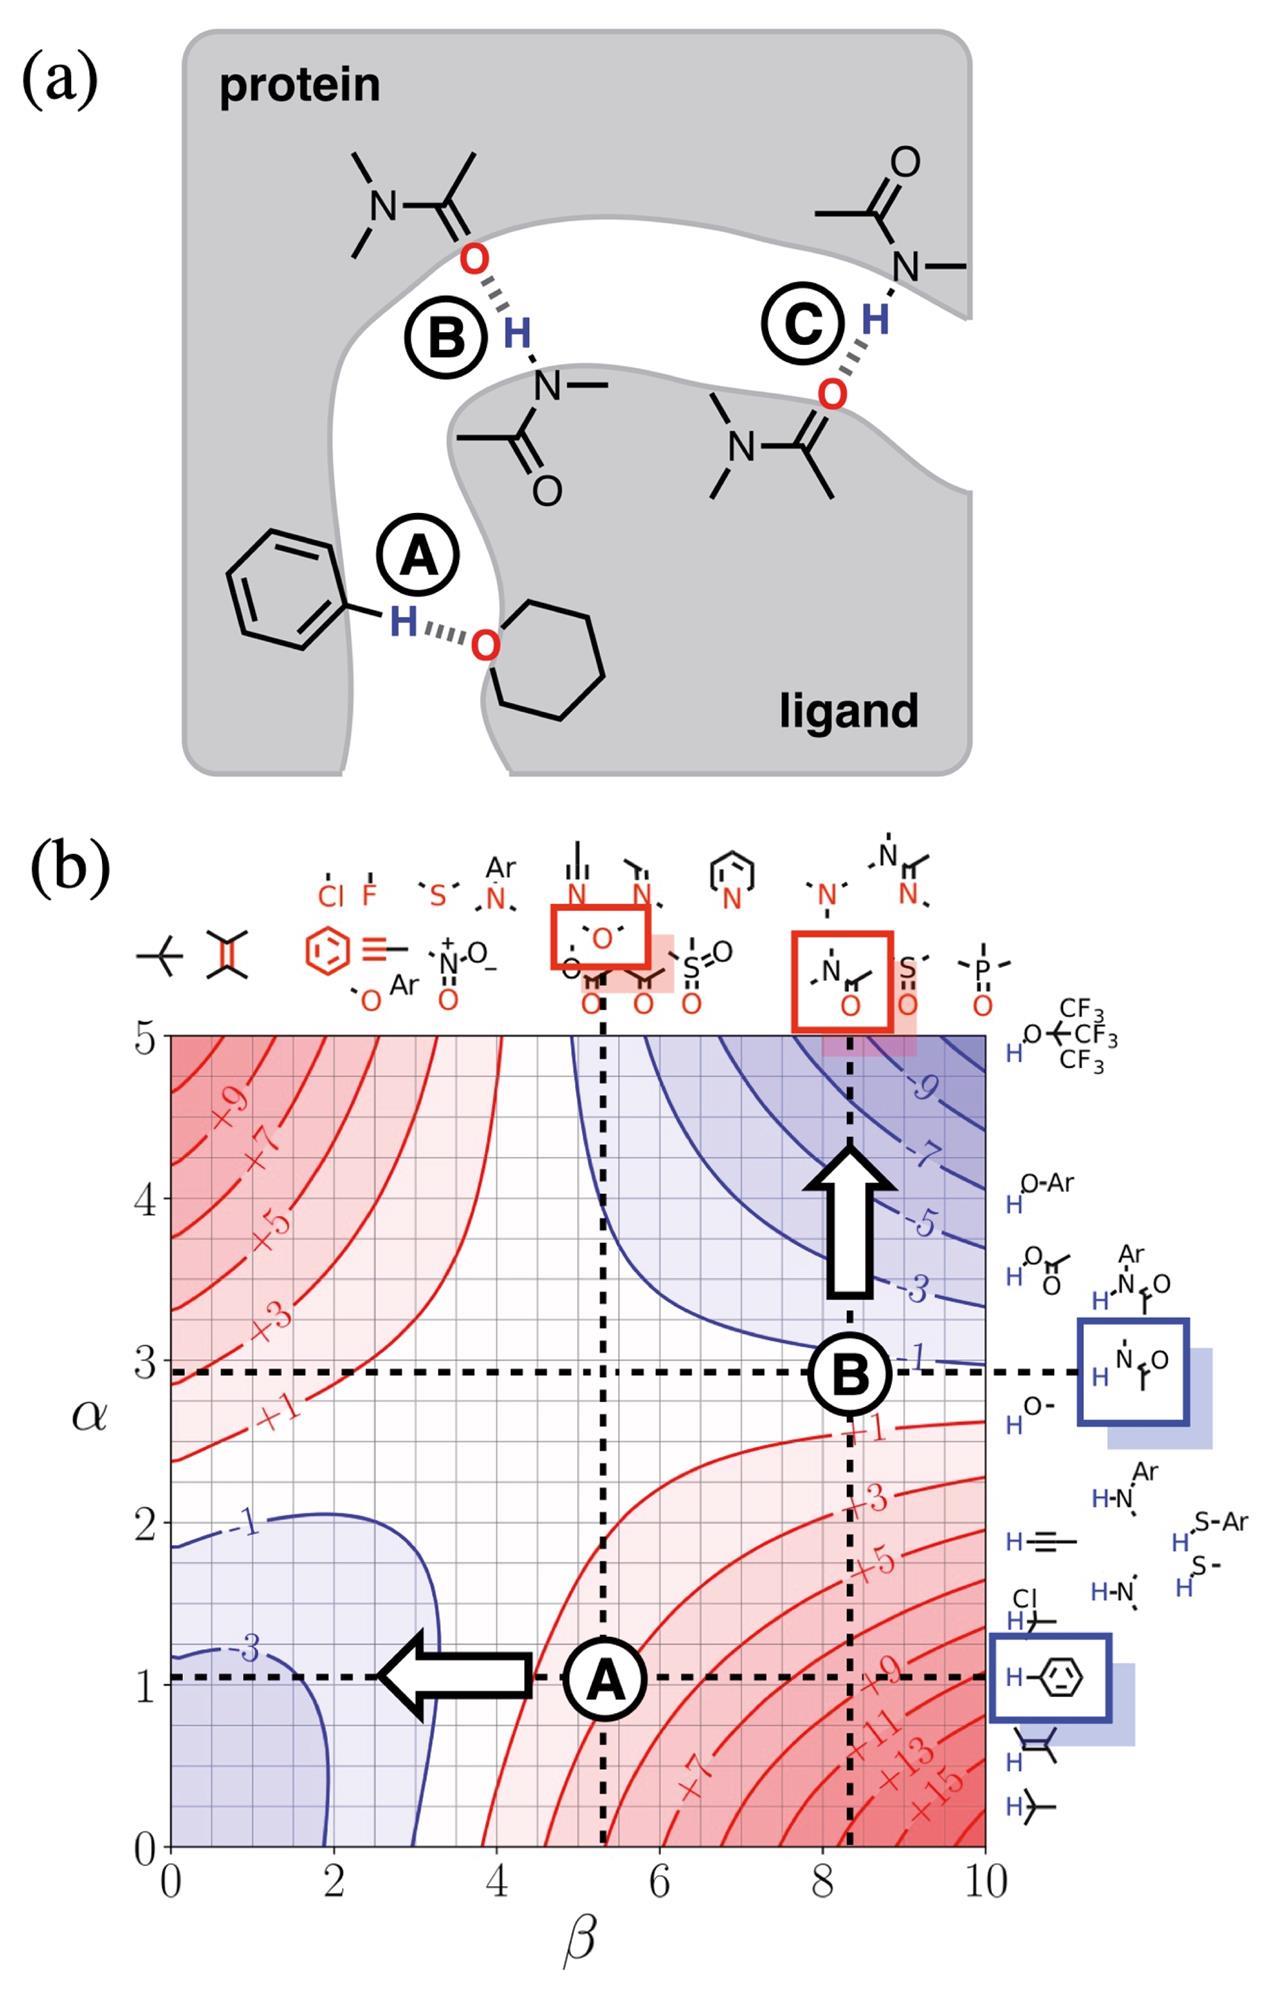 Model maps solvent effects on non-covalent interactions - Chemistry World